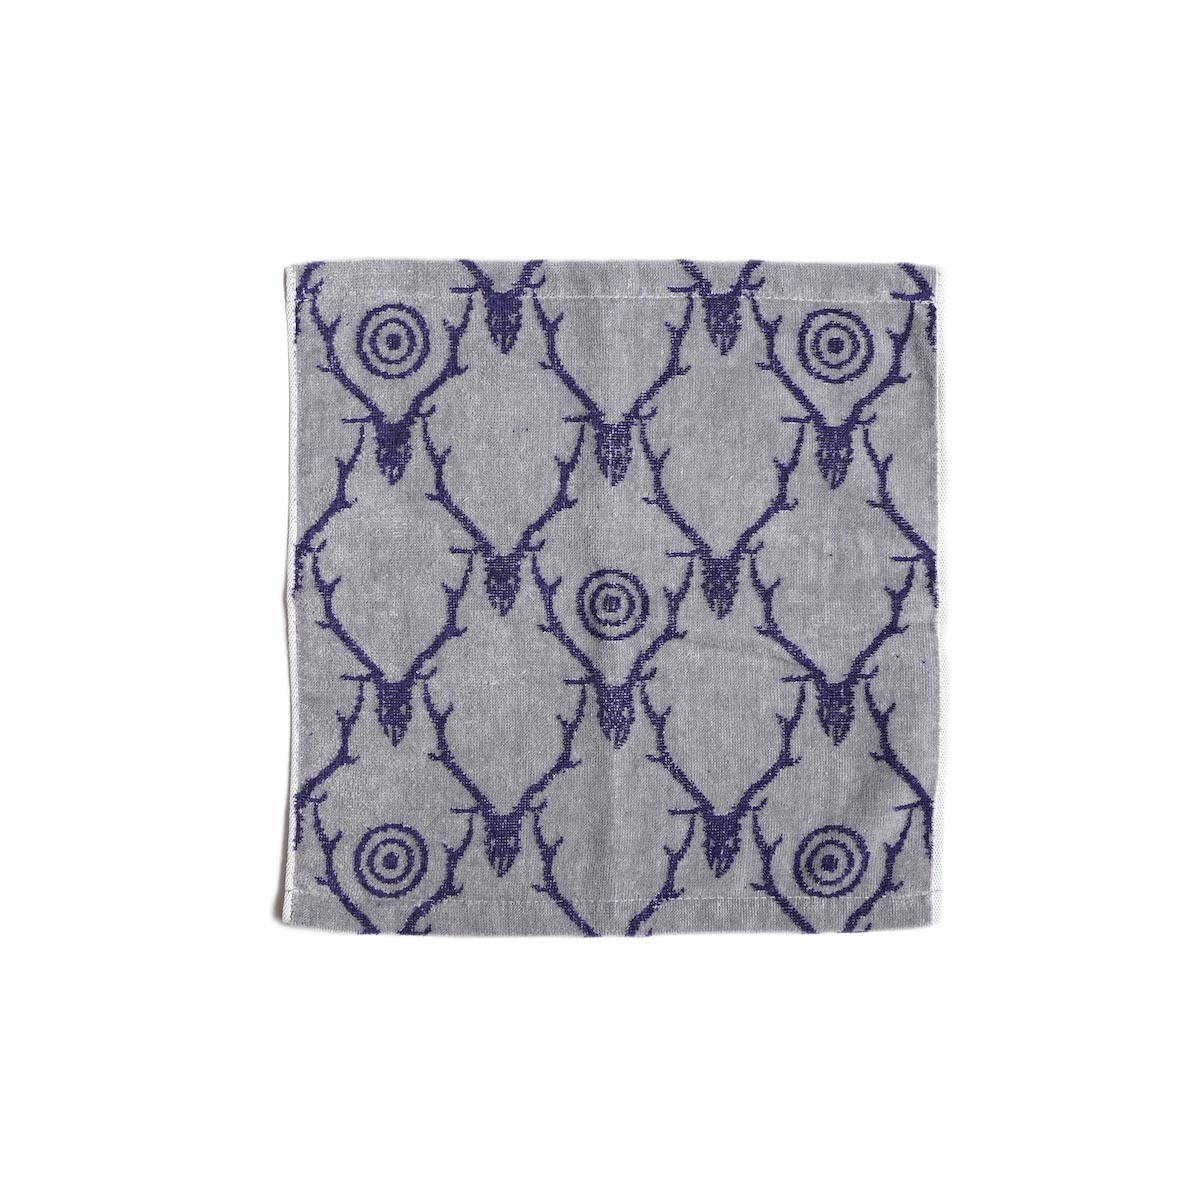 South2 West8 / Hand Towel (Grey)